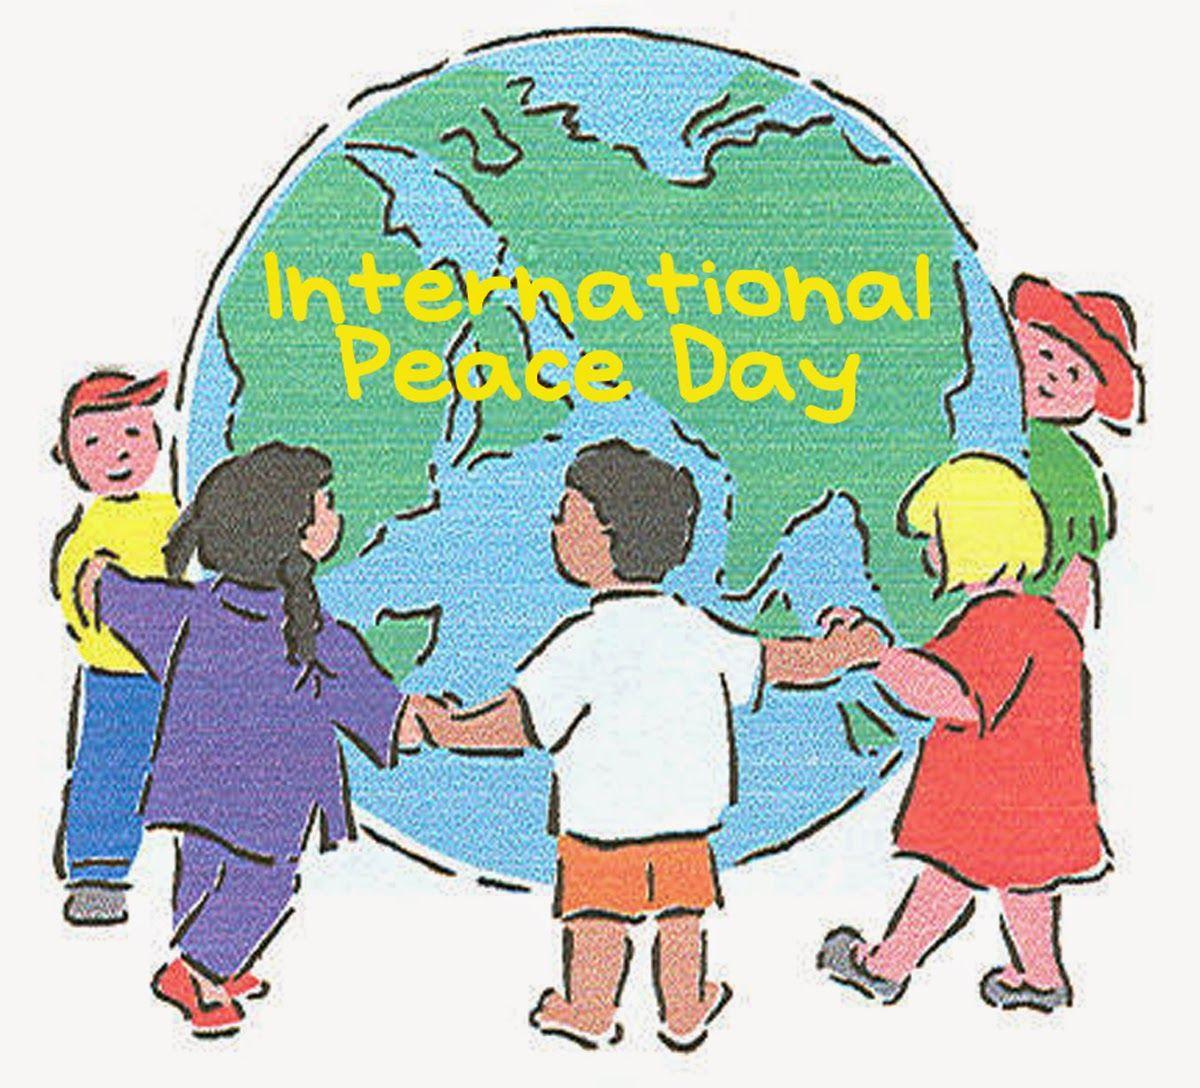 Moments of Introspection: Happy World Peace Day 2014